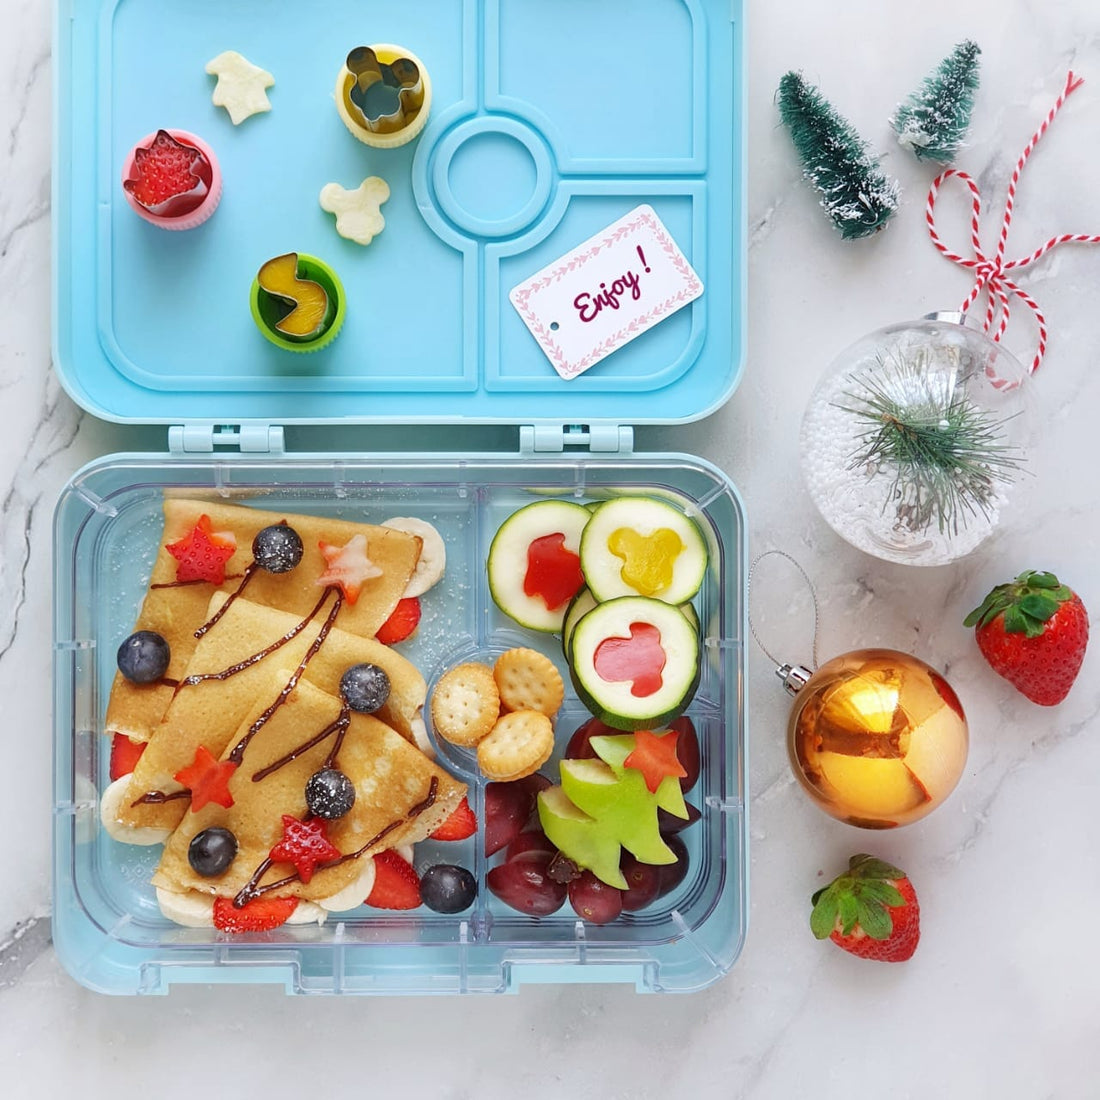 CREPES WITH BERRIES - Cars 4 Compartment Lunch Box